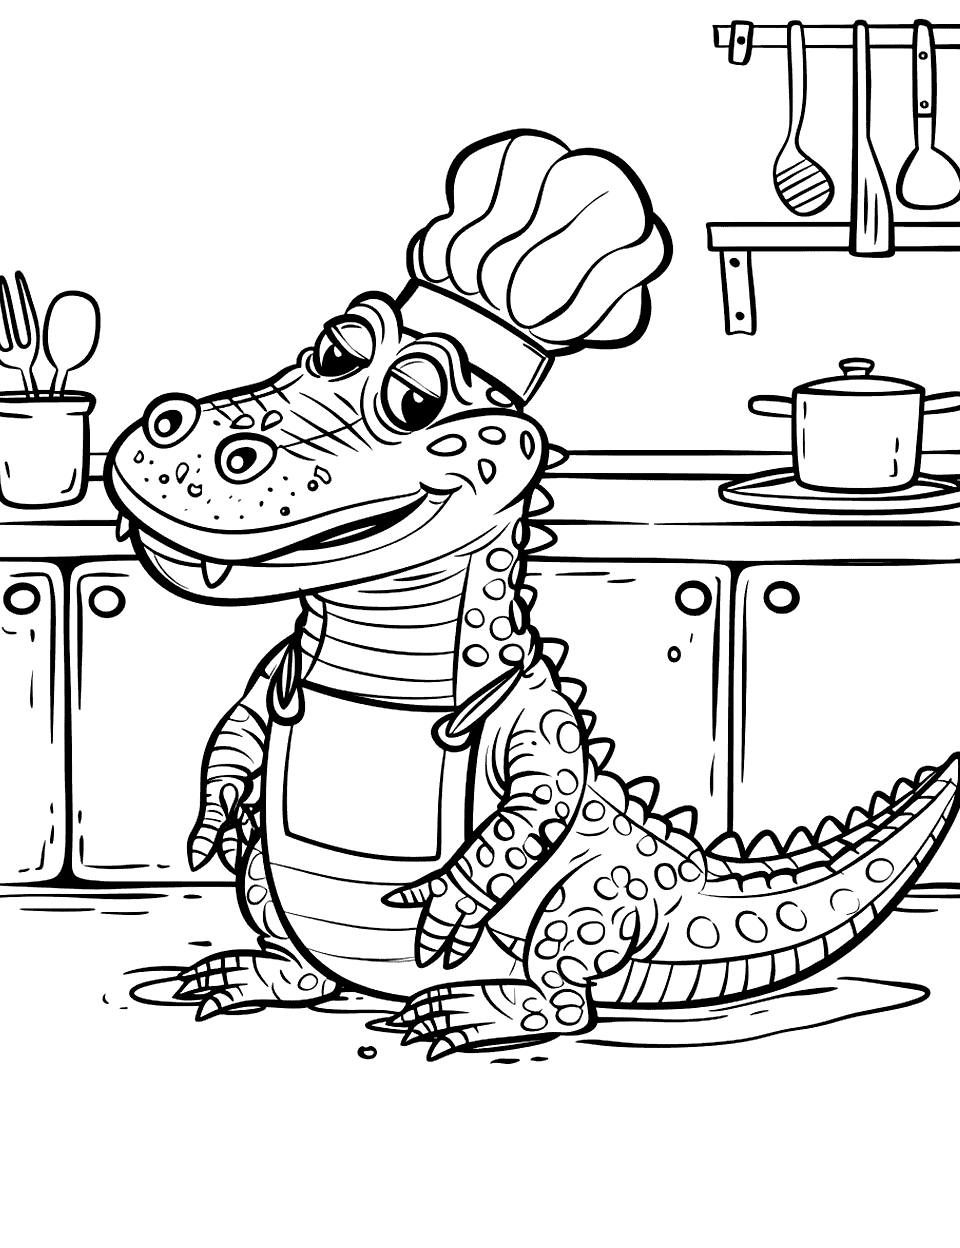 Alligator Chef Coloring Page - An alligator wearing a chef’s hat and apron, cooking in a kitchen.